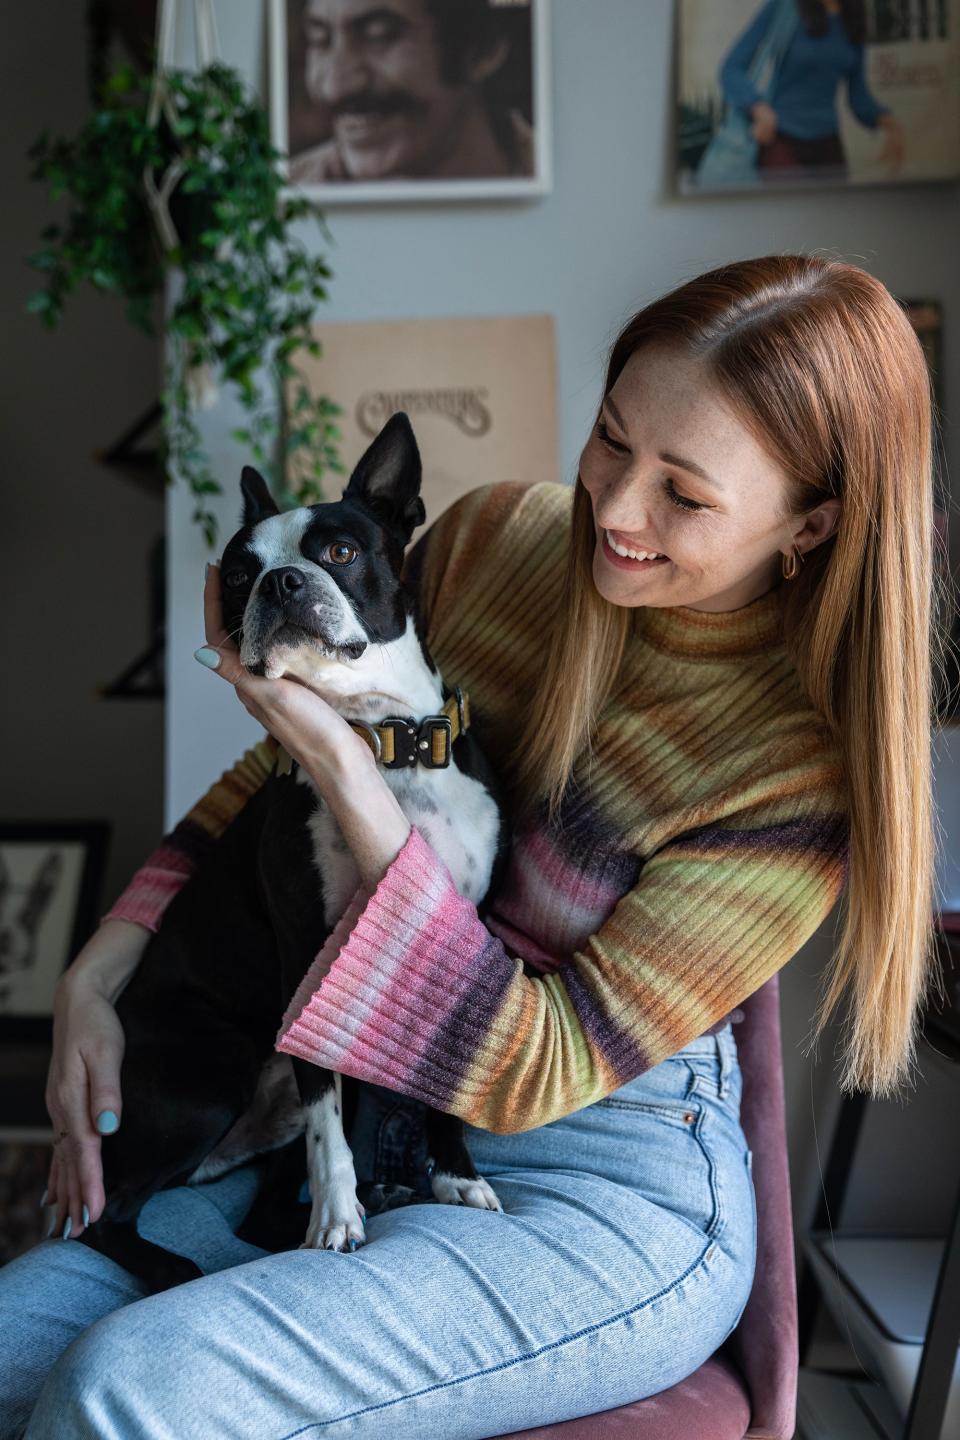 Liz Fleming, known as Liz from Iowa on TikTok, and her dog Chandler, pose for a photo at her home in Des Moines.